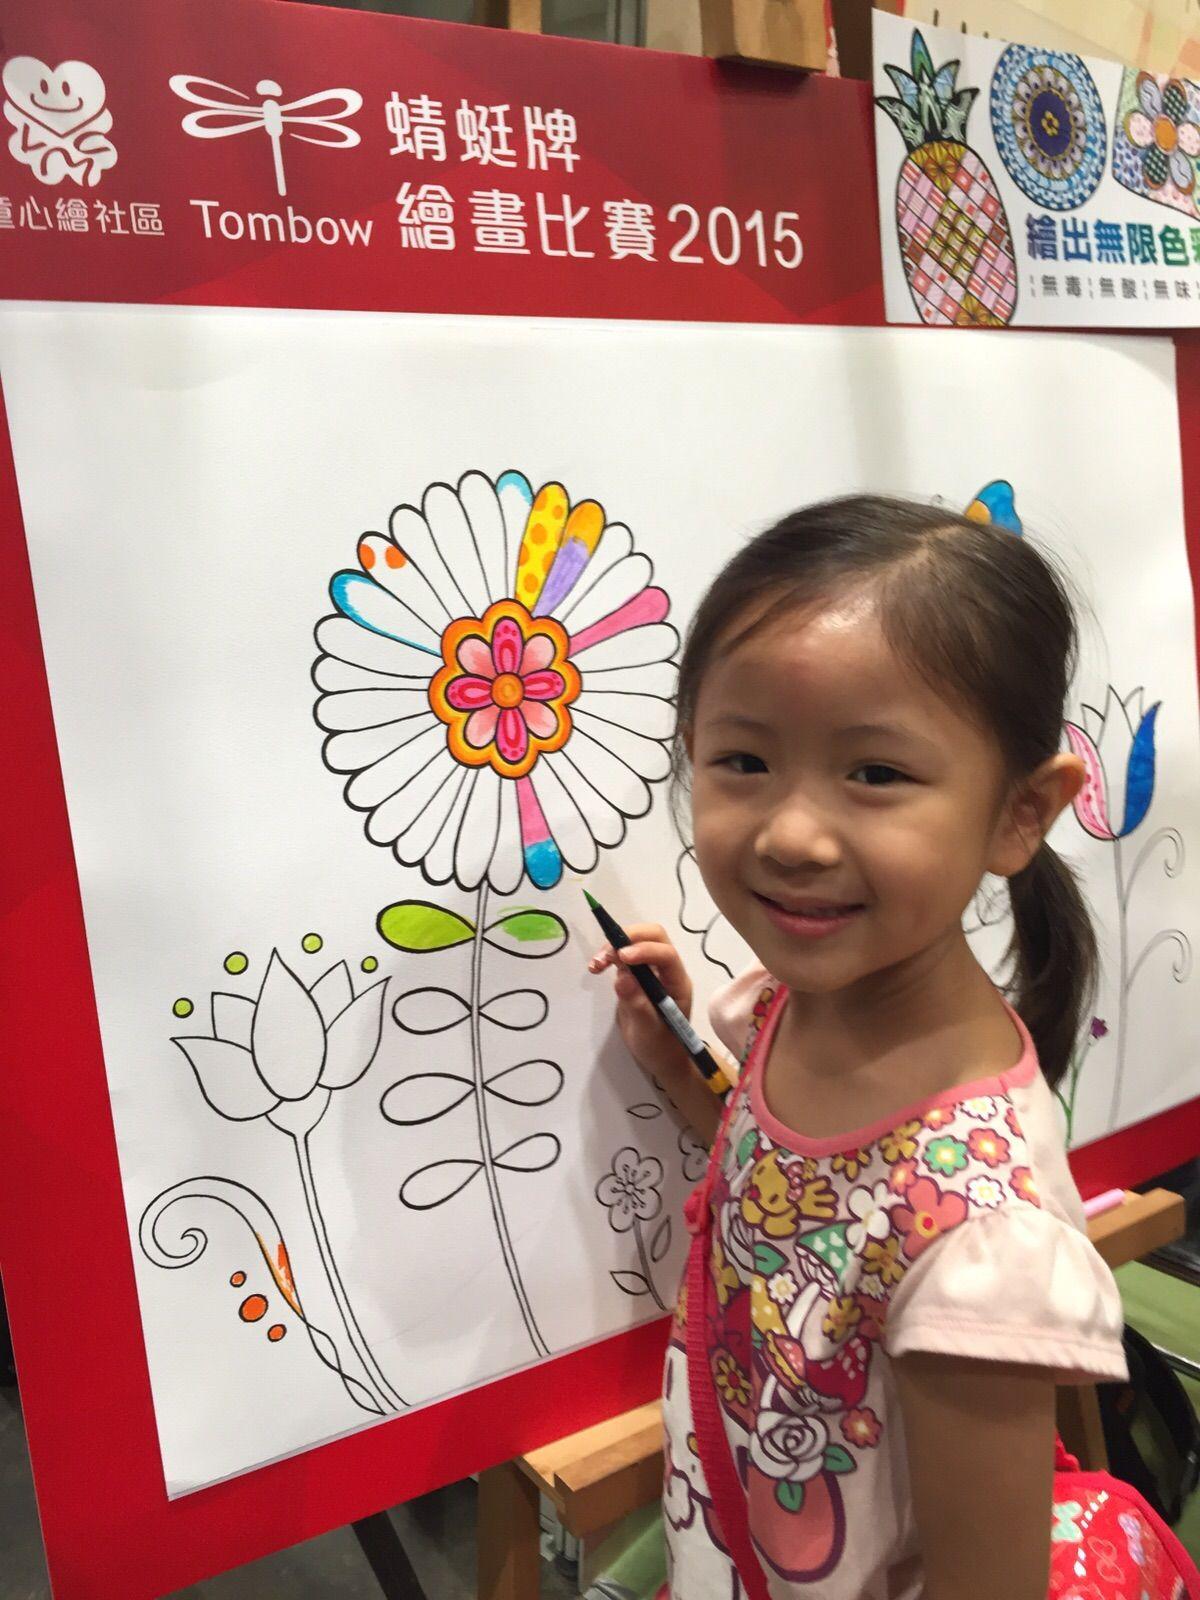 Onsite promotion of 'Love My Community' drawing competition